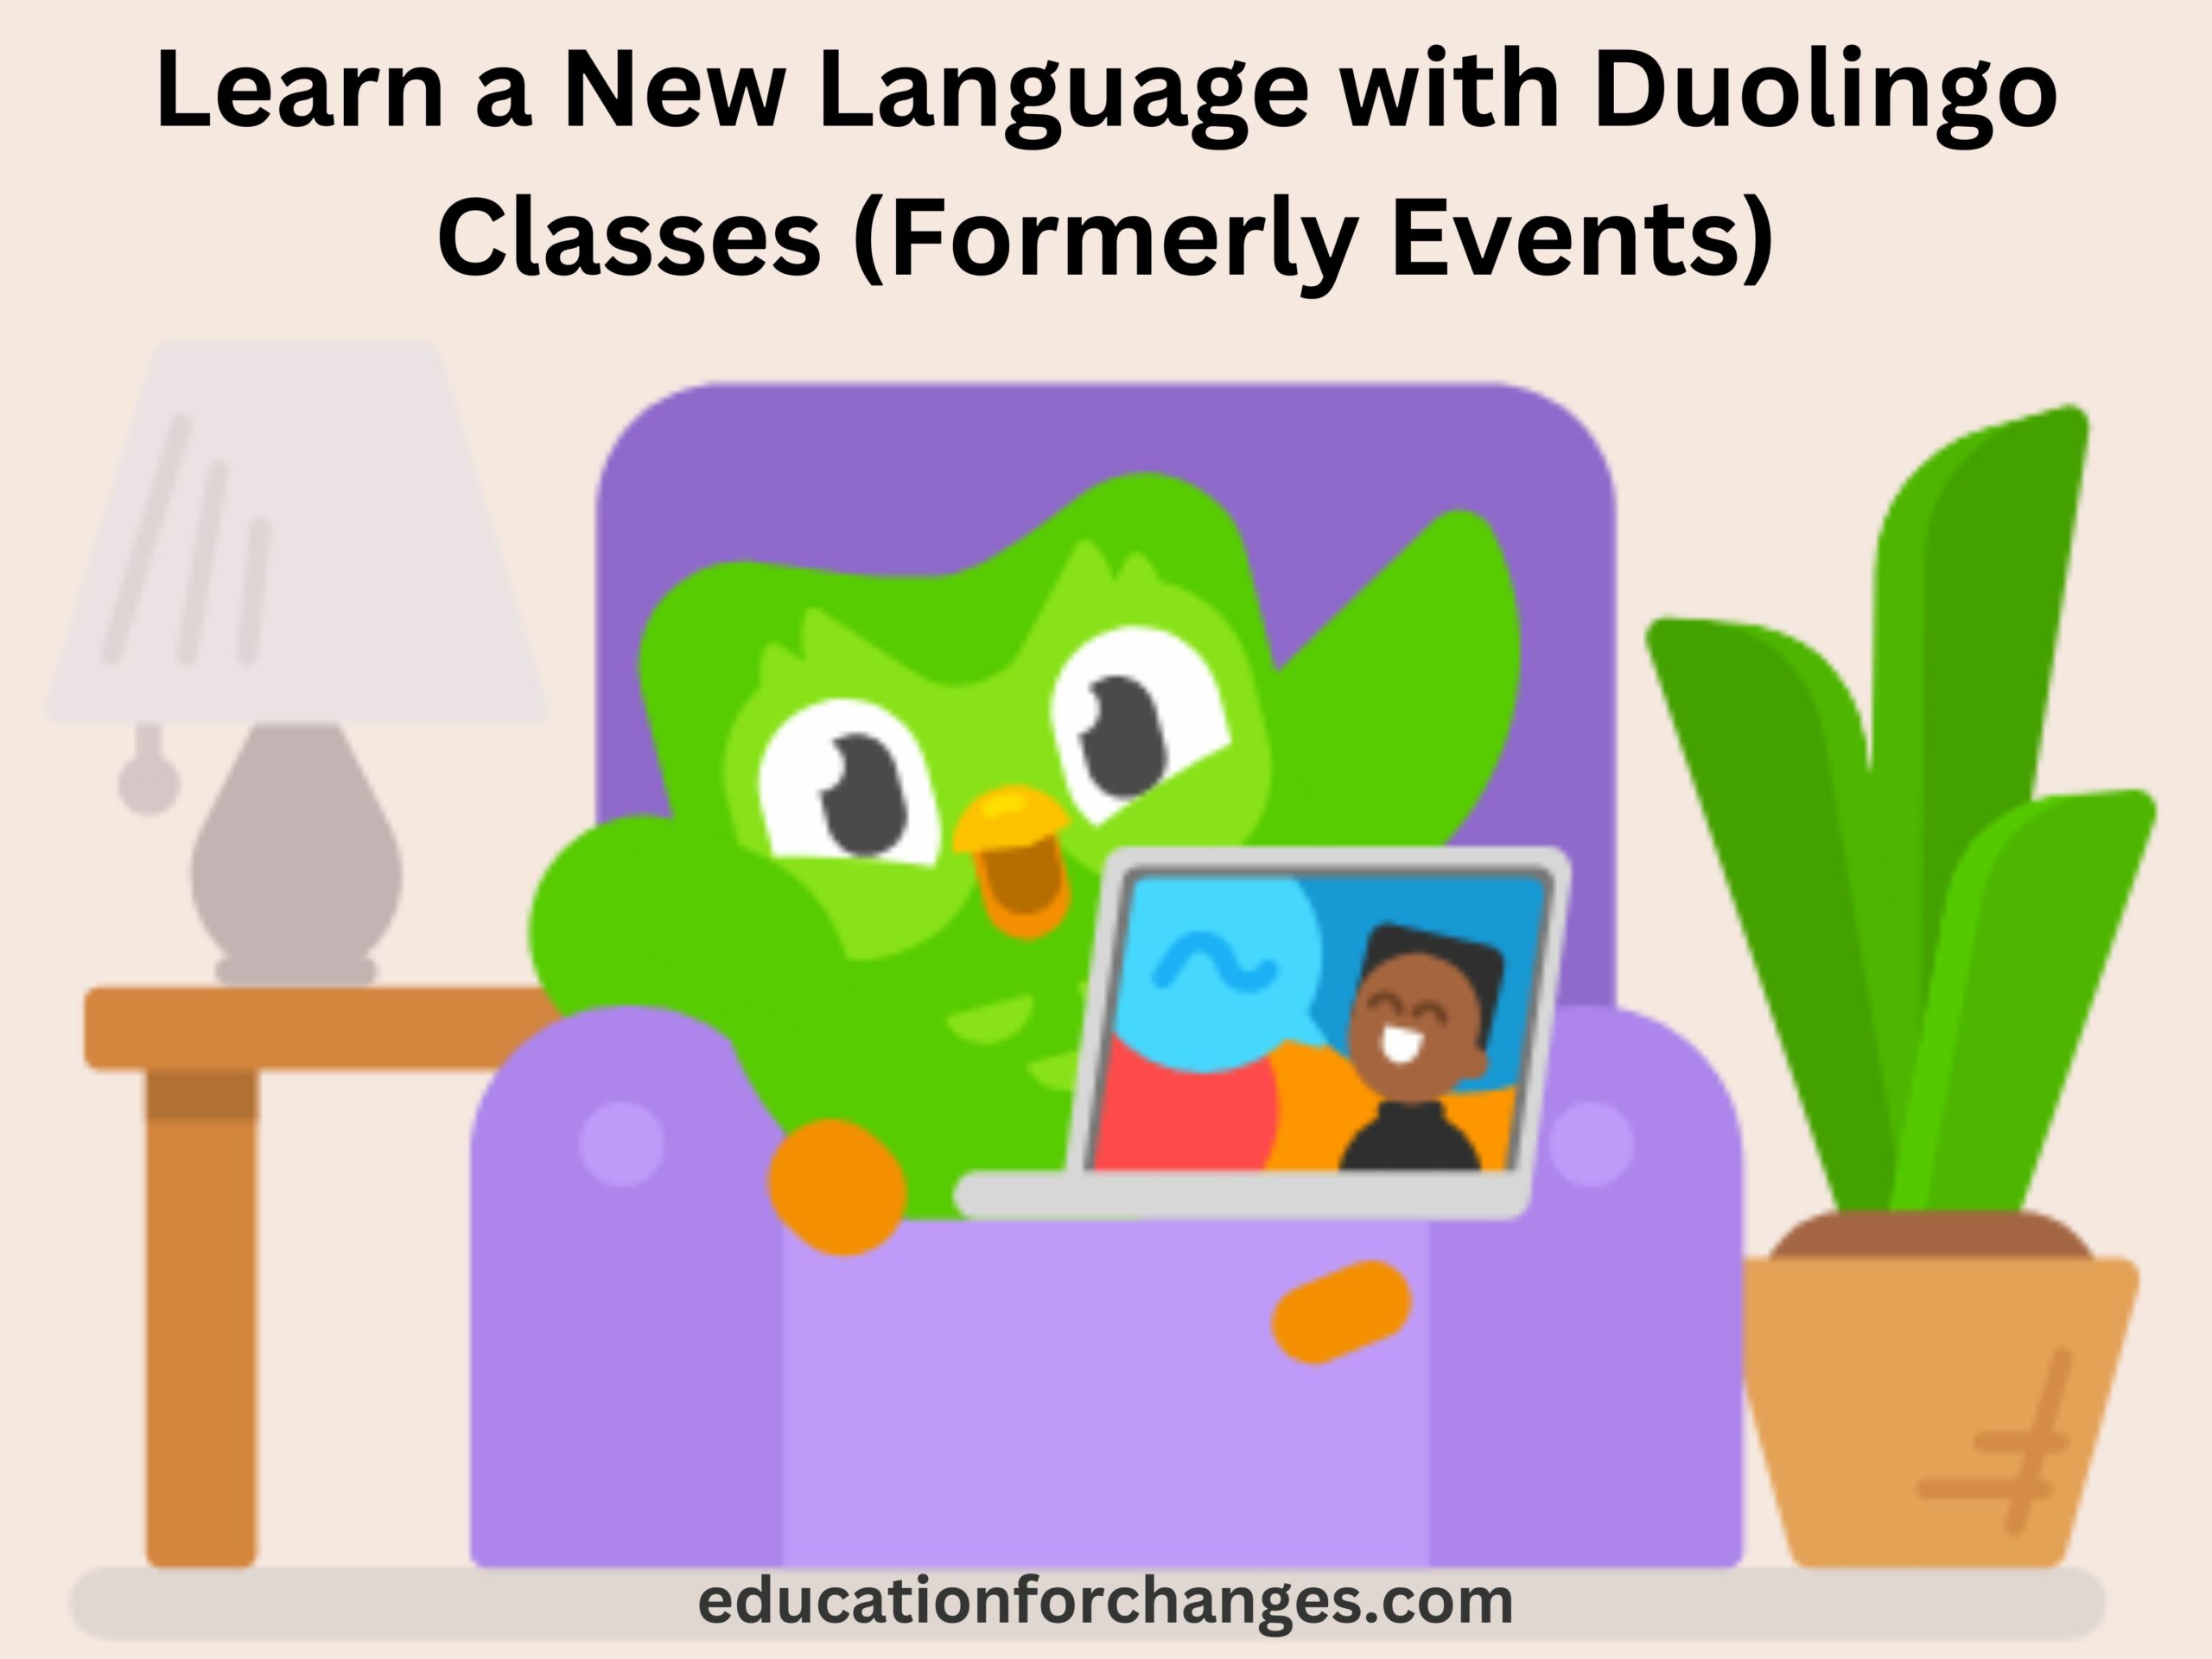 Learn a New Language with Duolingo Classes (Formerly Events)